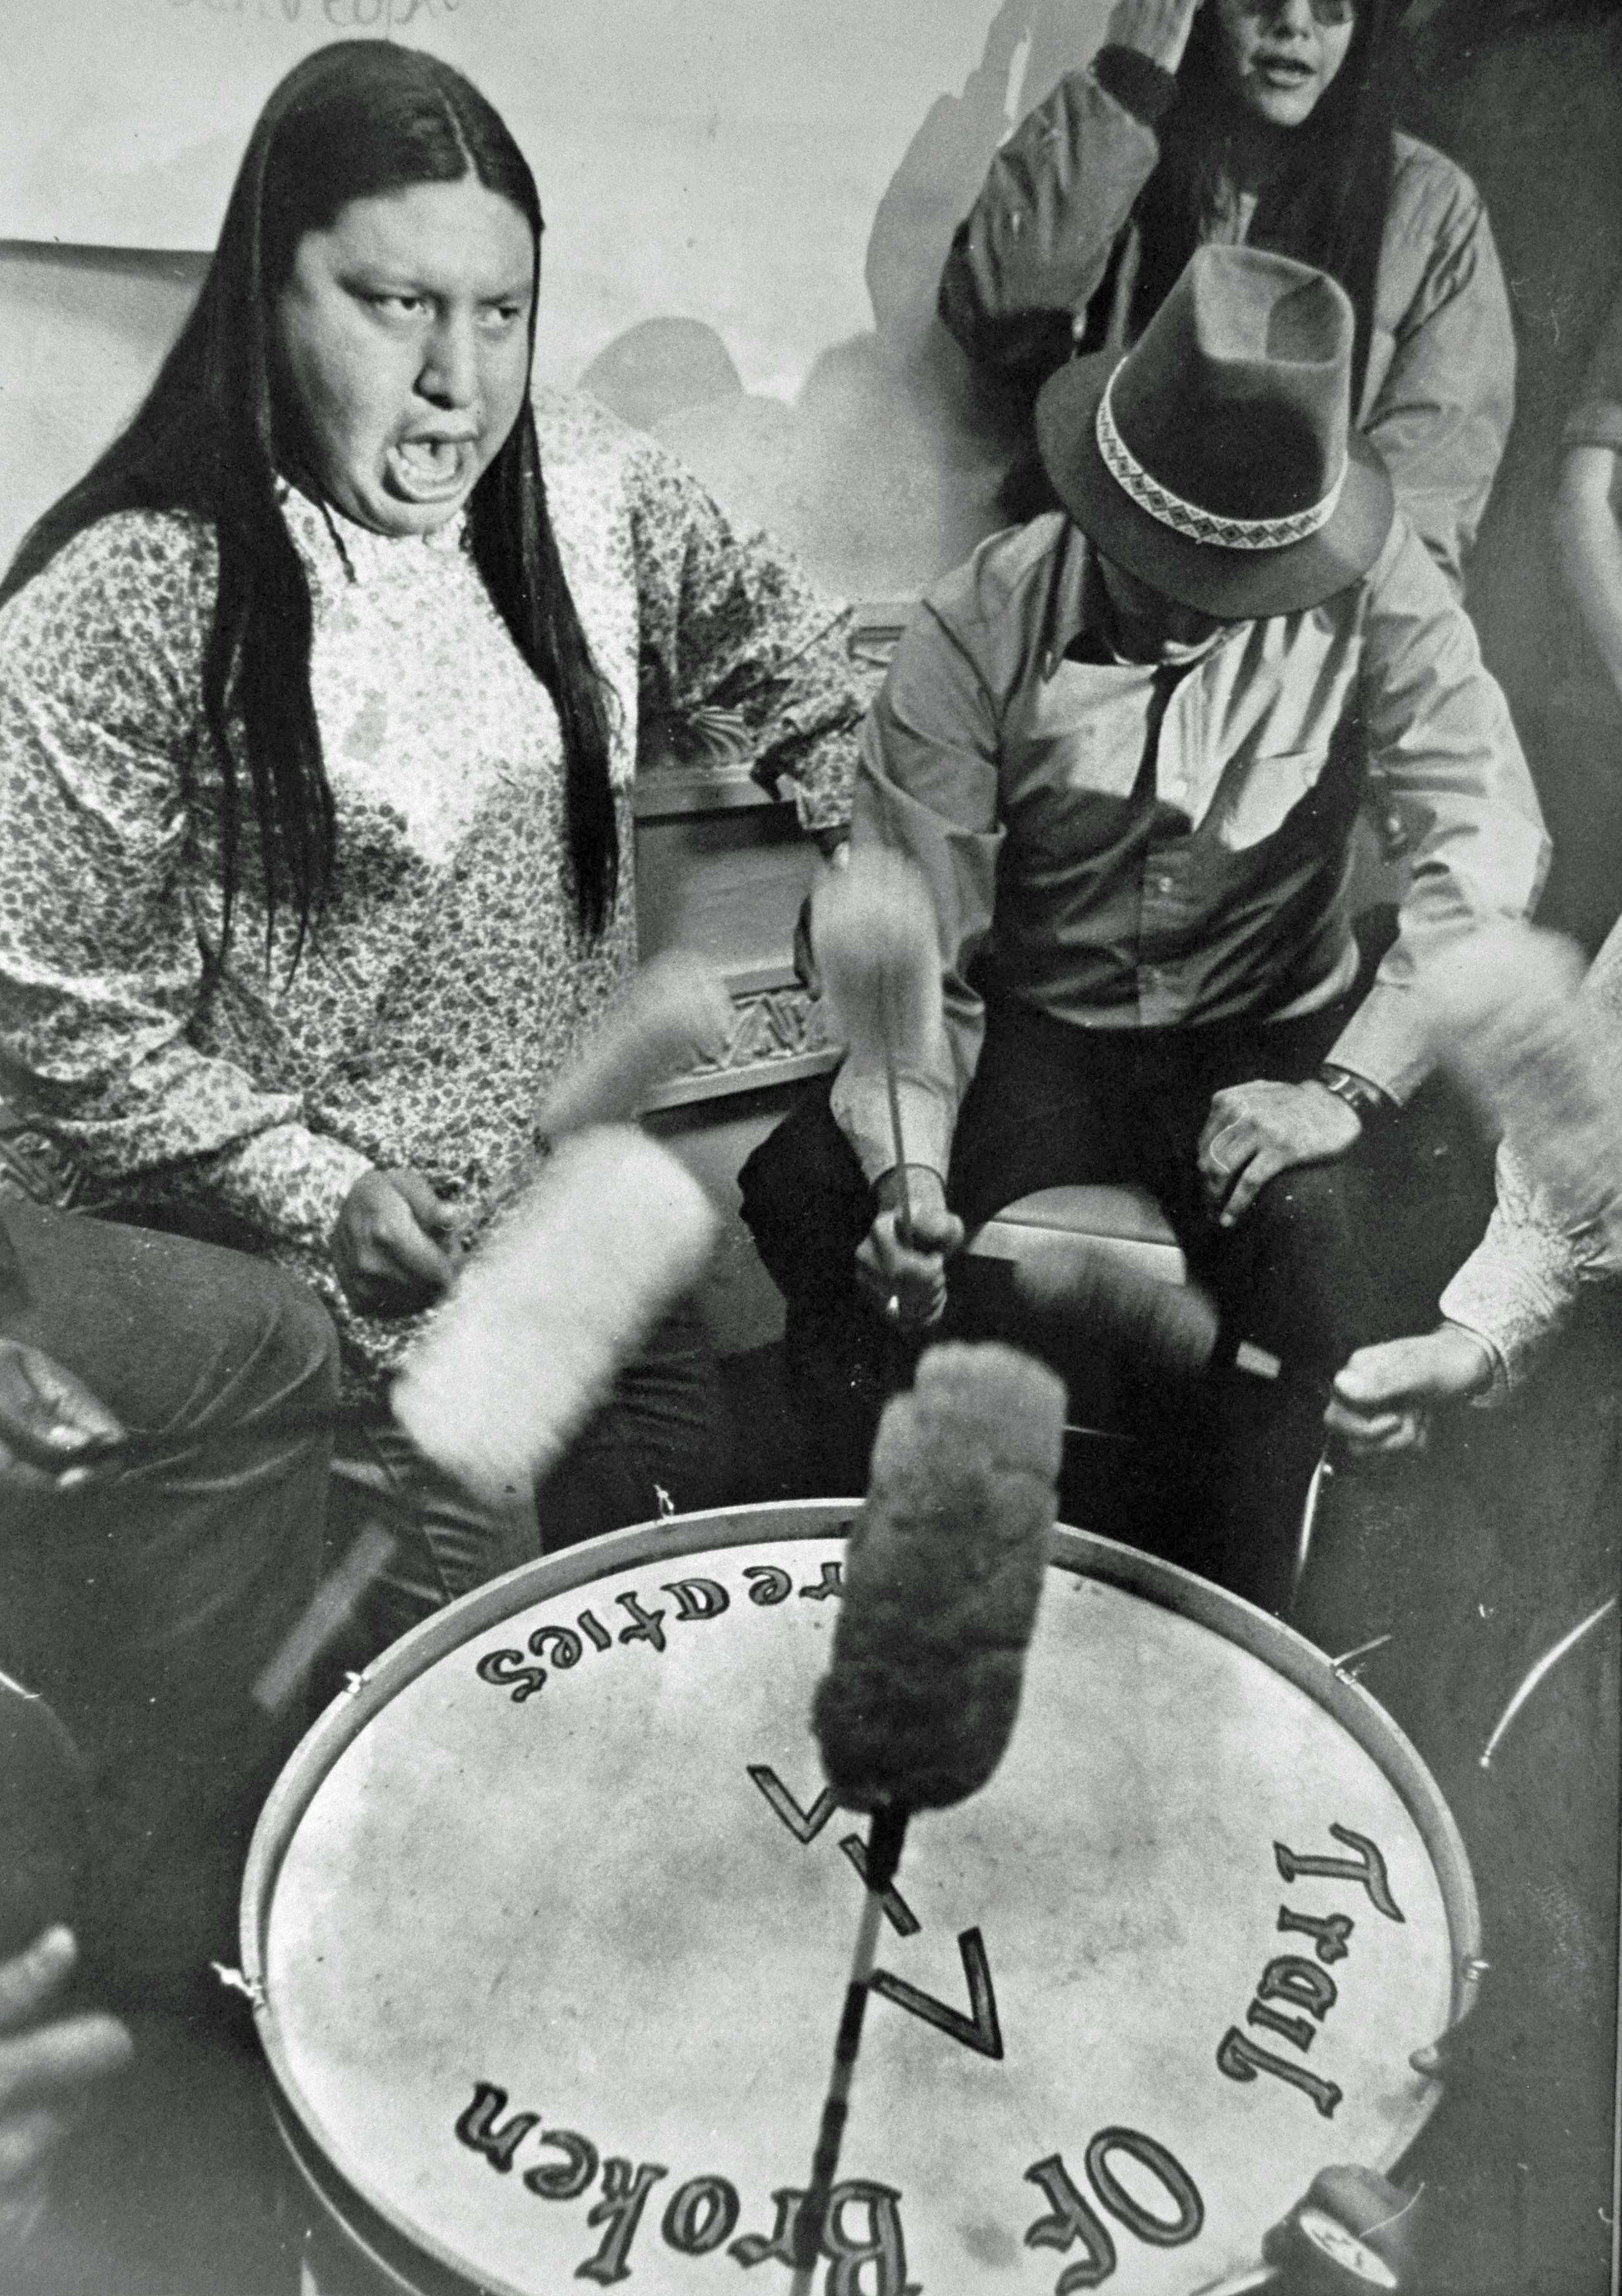 Black and white photograph of a Native American man leading a drum session in the Bureau of Indian Affairs in Washington, D.C. on the first day of demonstrations. 